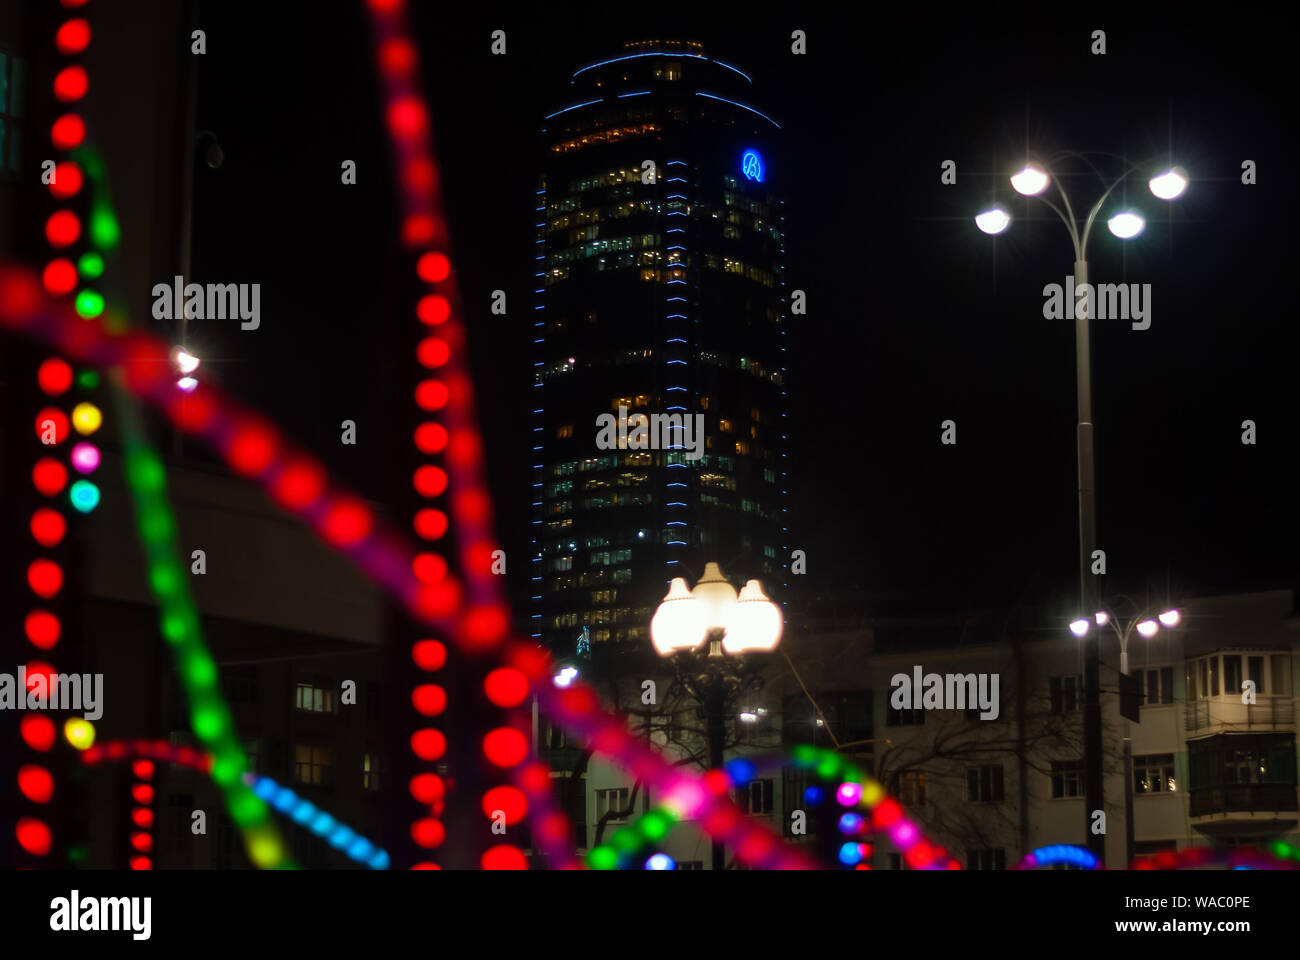 Yekaterinburg, Russia - January 17, 2019: colorful lights - a fragment of New Year's illumination outdoors in the night city and Vysotsky skyscraper o Stock Photo